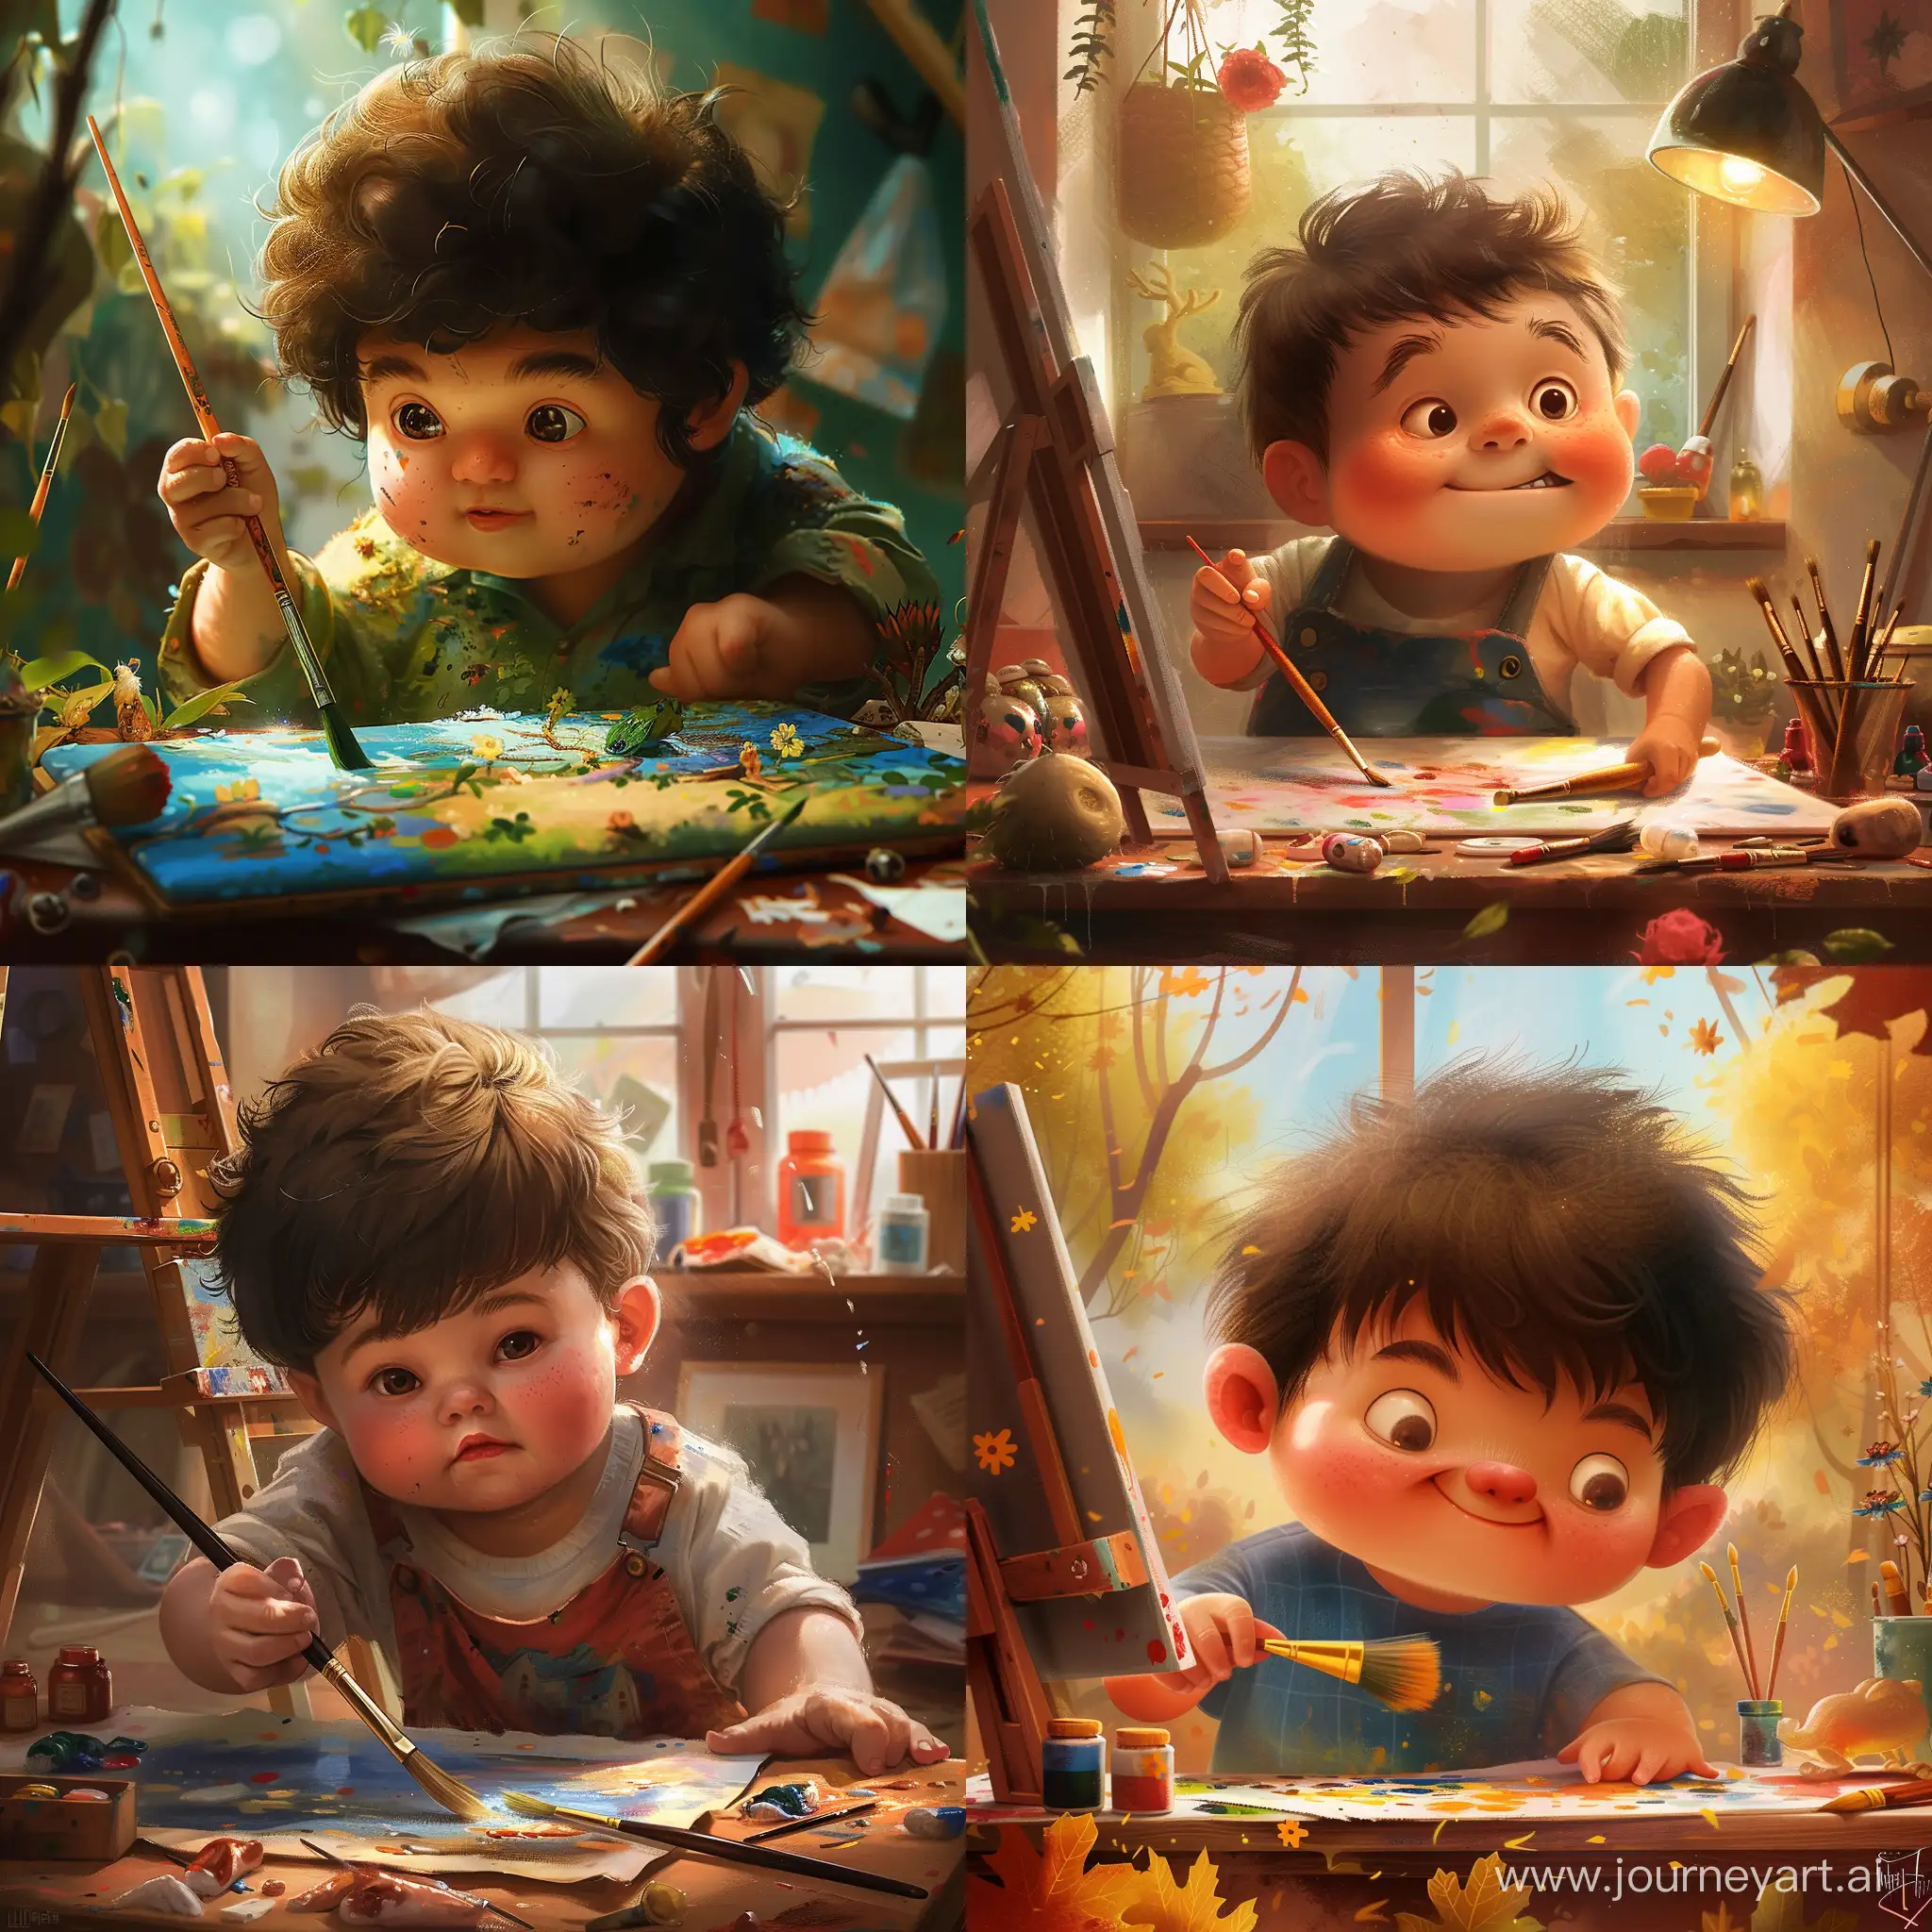 A plump boy is engrossed in painting, his chubby cheeks and determined gaze shining through. His brush moves smoothly across the canvas, creating vibrant and colorful works of art. His creativity and patience are astonishing, as he carefully crafts every detail. His paintings are full of vitality and life, as if each scene is telling a beautiful story.
Key words: Focus, Creativity, Patience, Vibrant, Vitality, Story.

